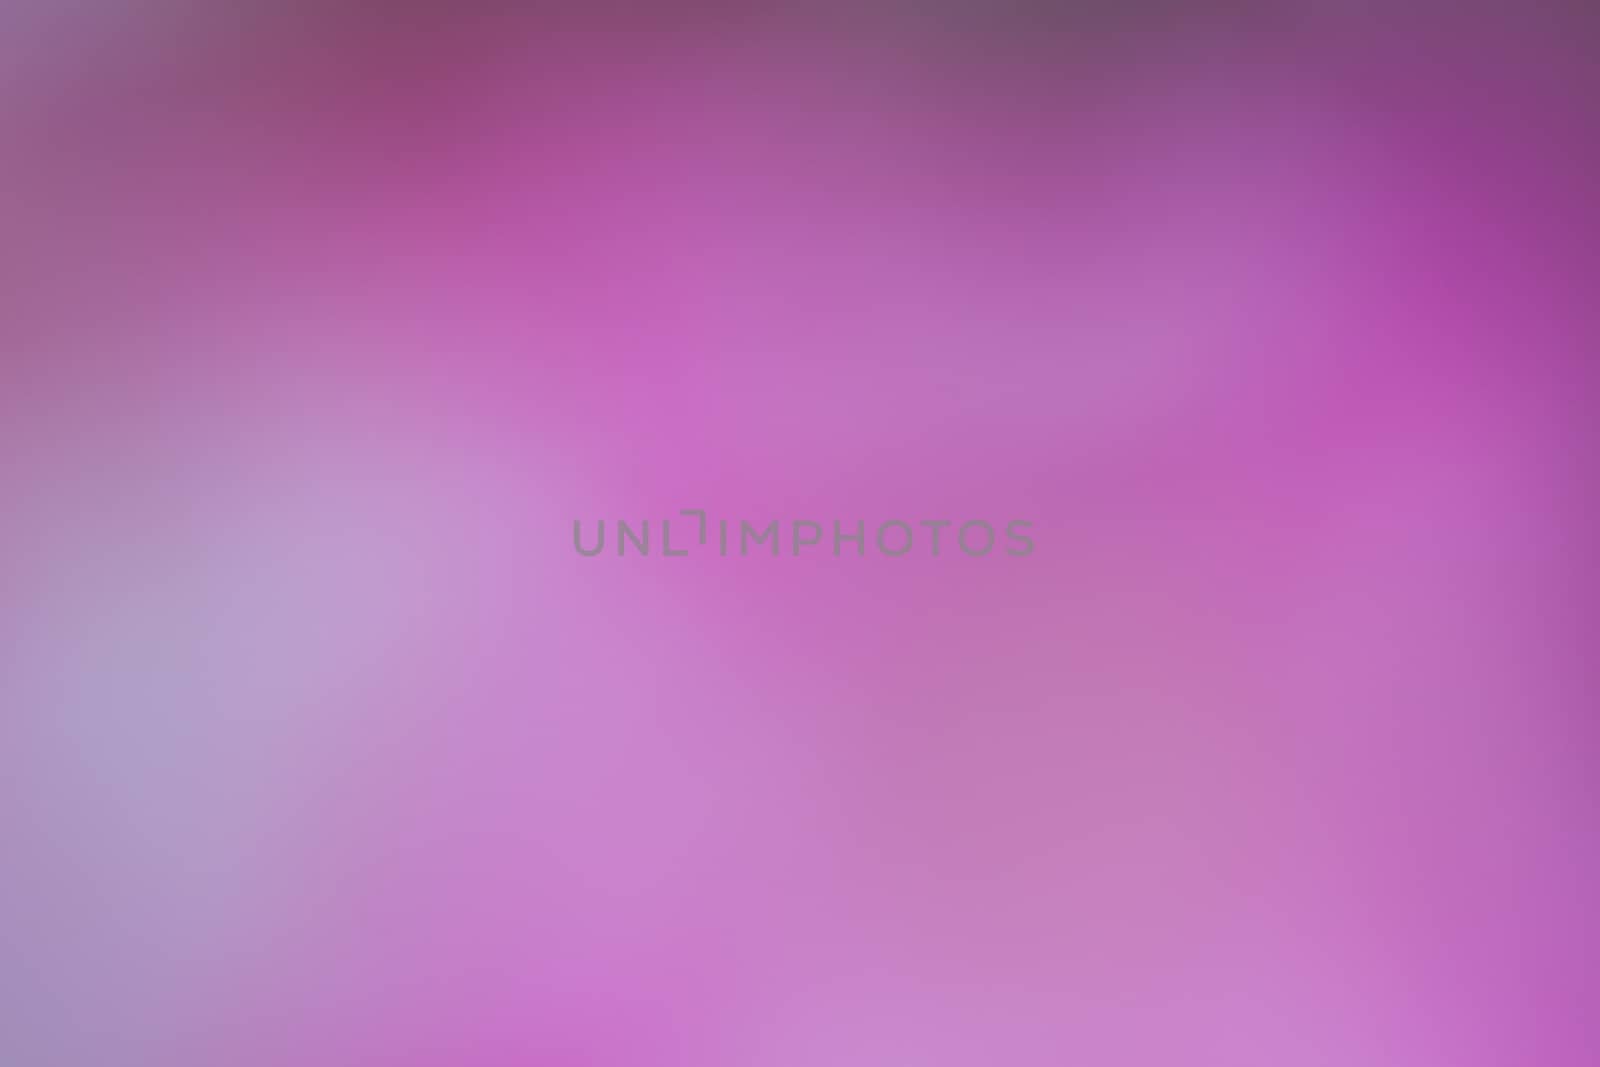 Diagonally Graduated Abstract Formless Diffuse Pink Background